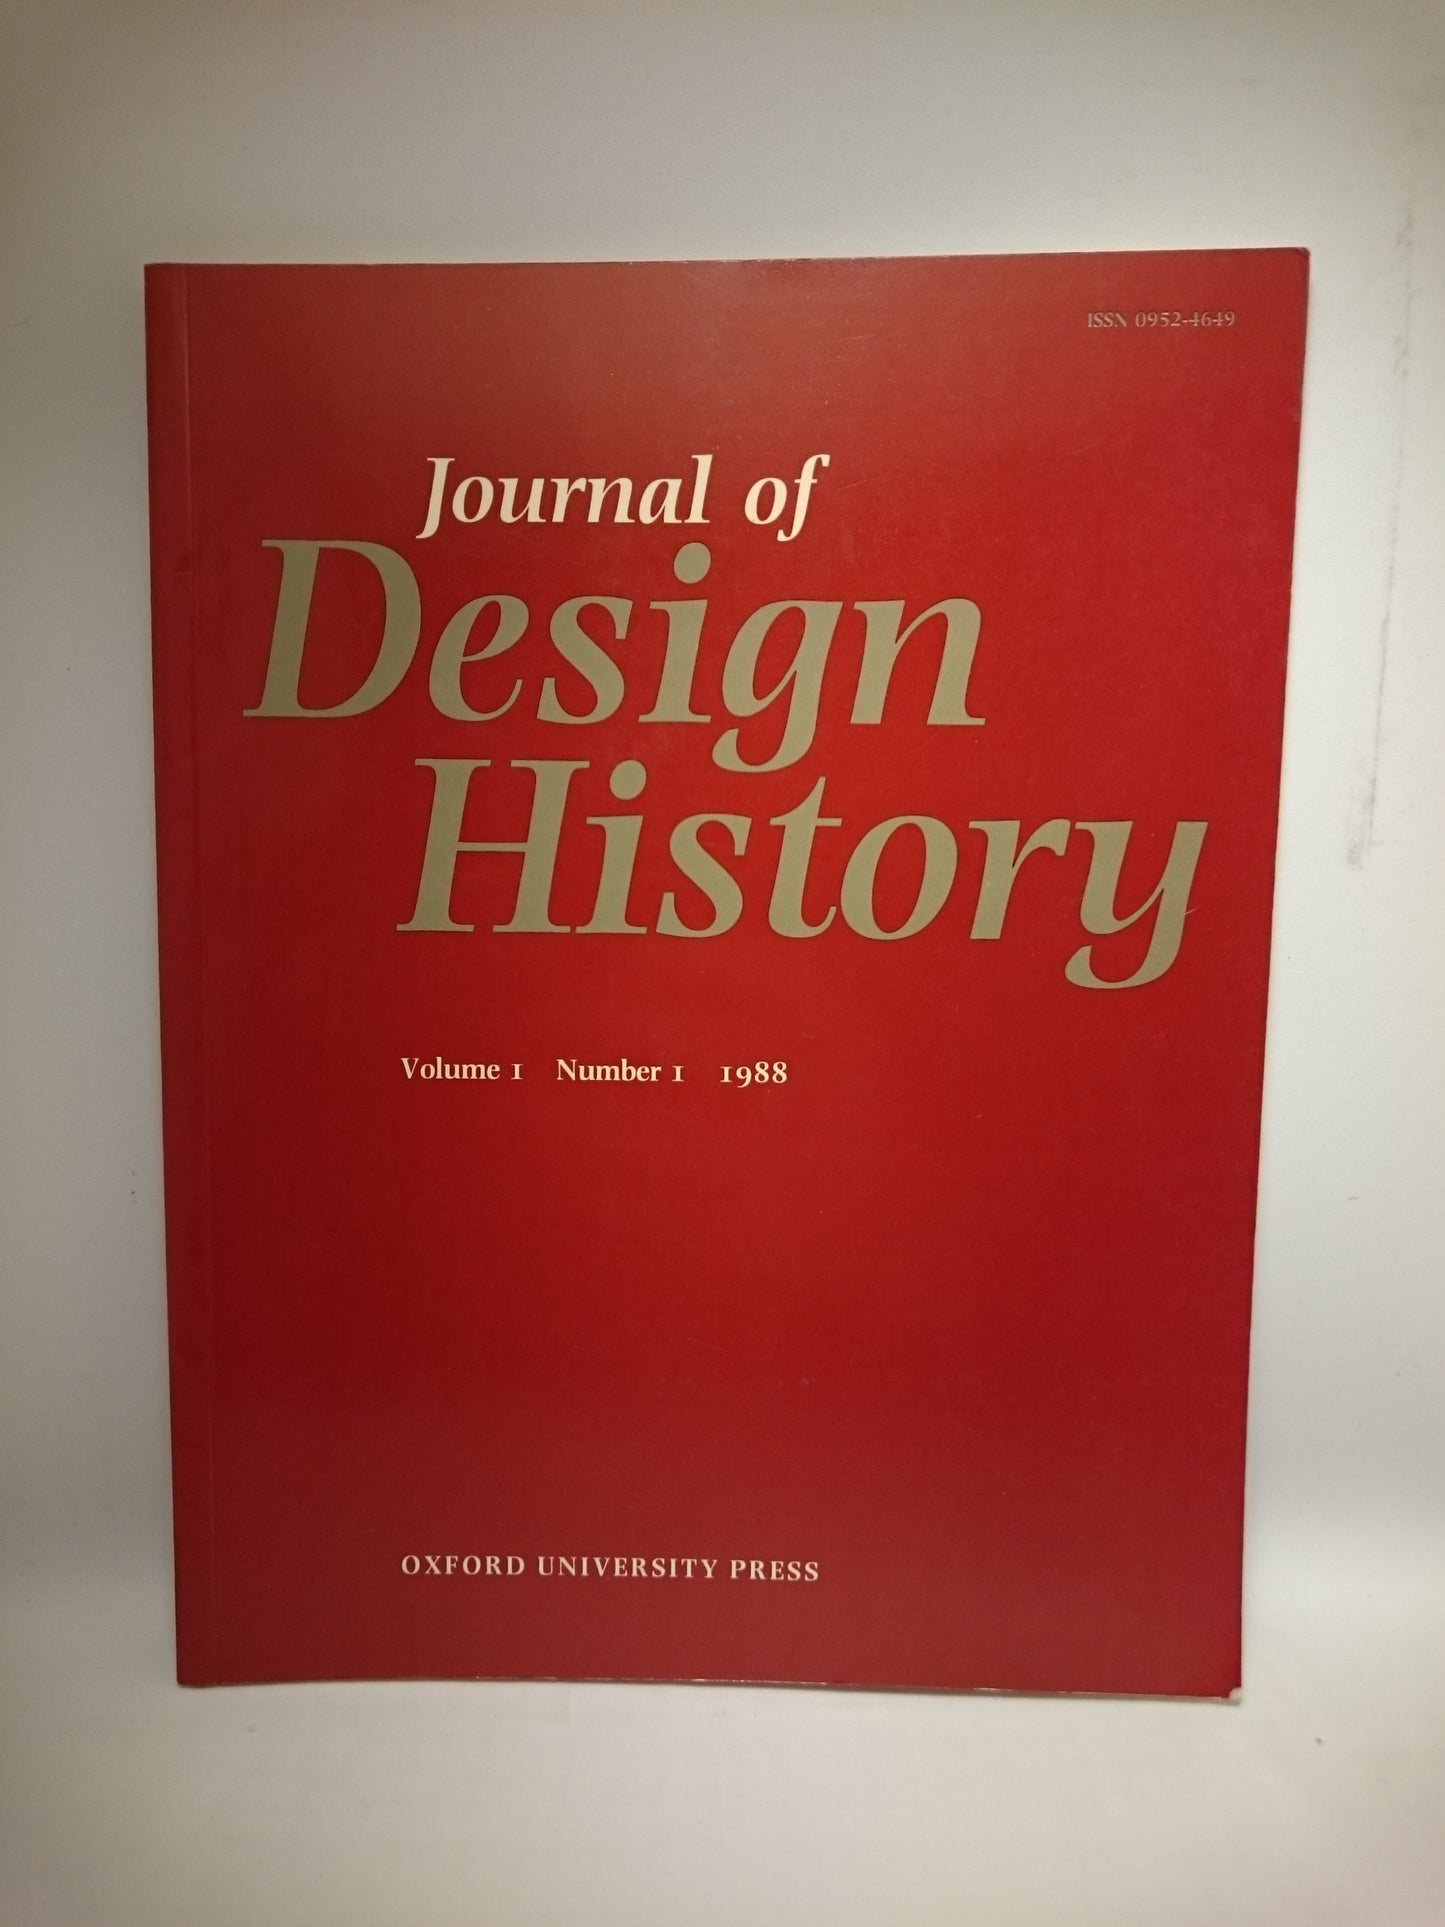 The Journal of Design History Vol 1 Issue 1